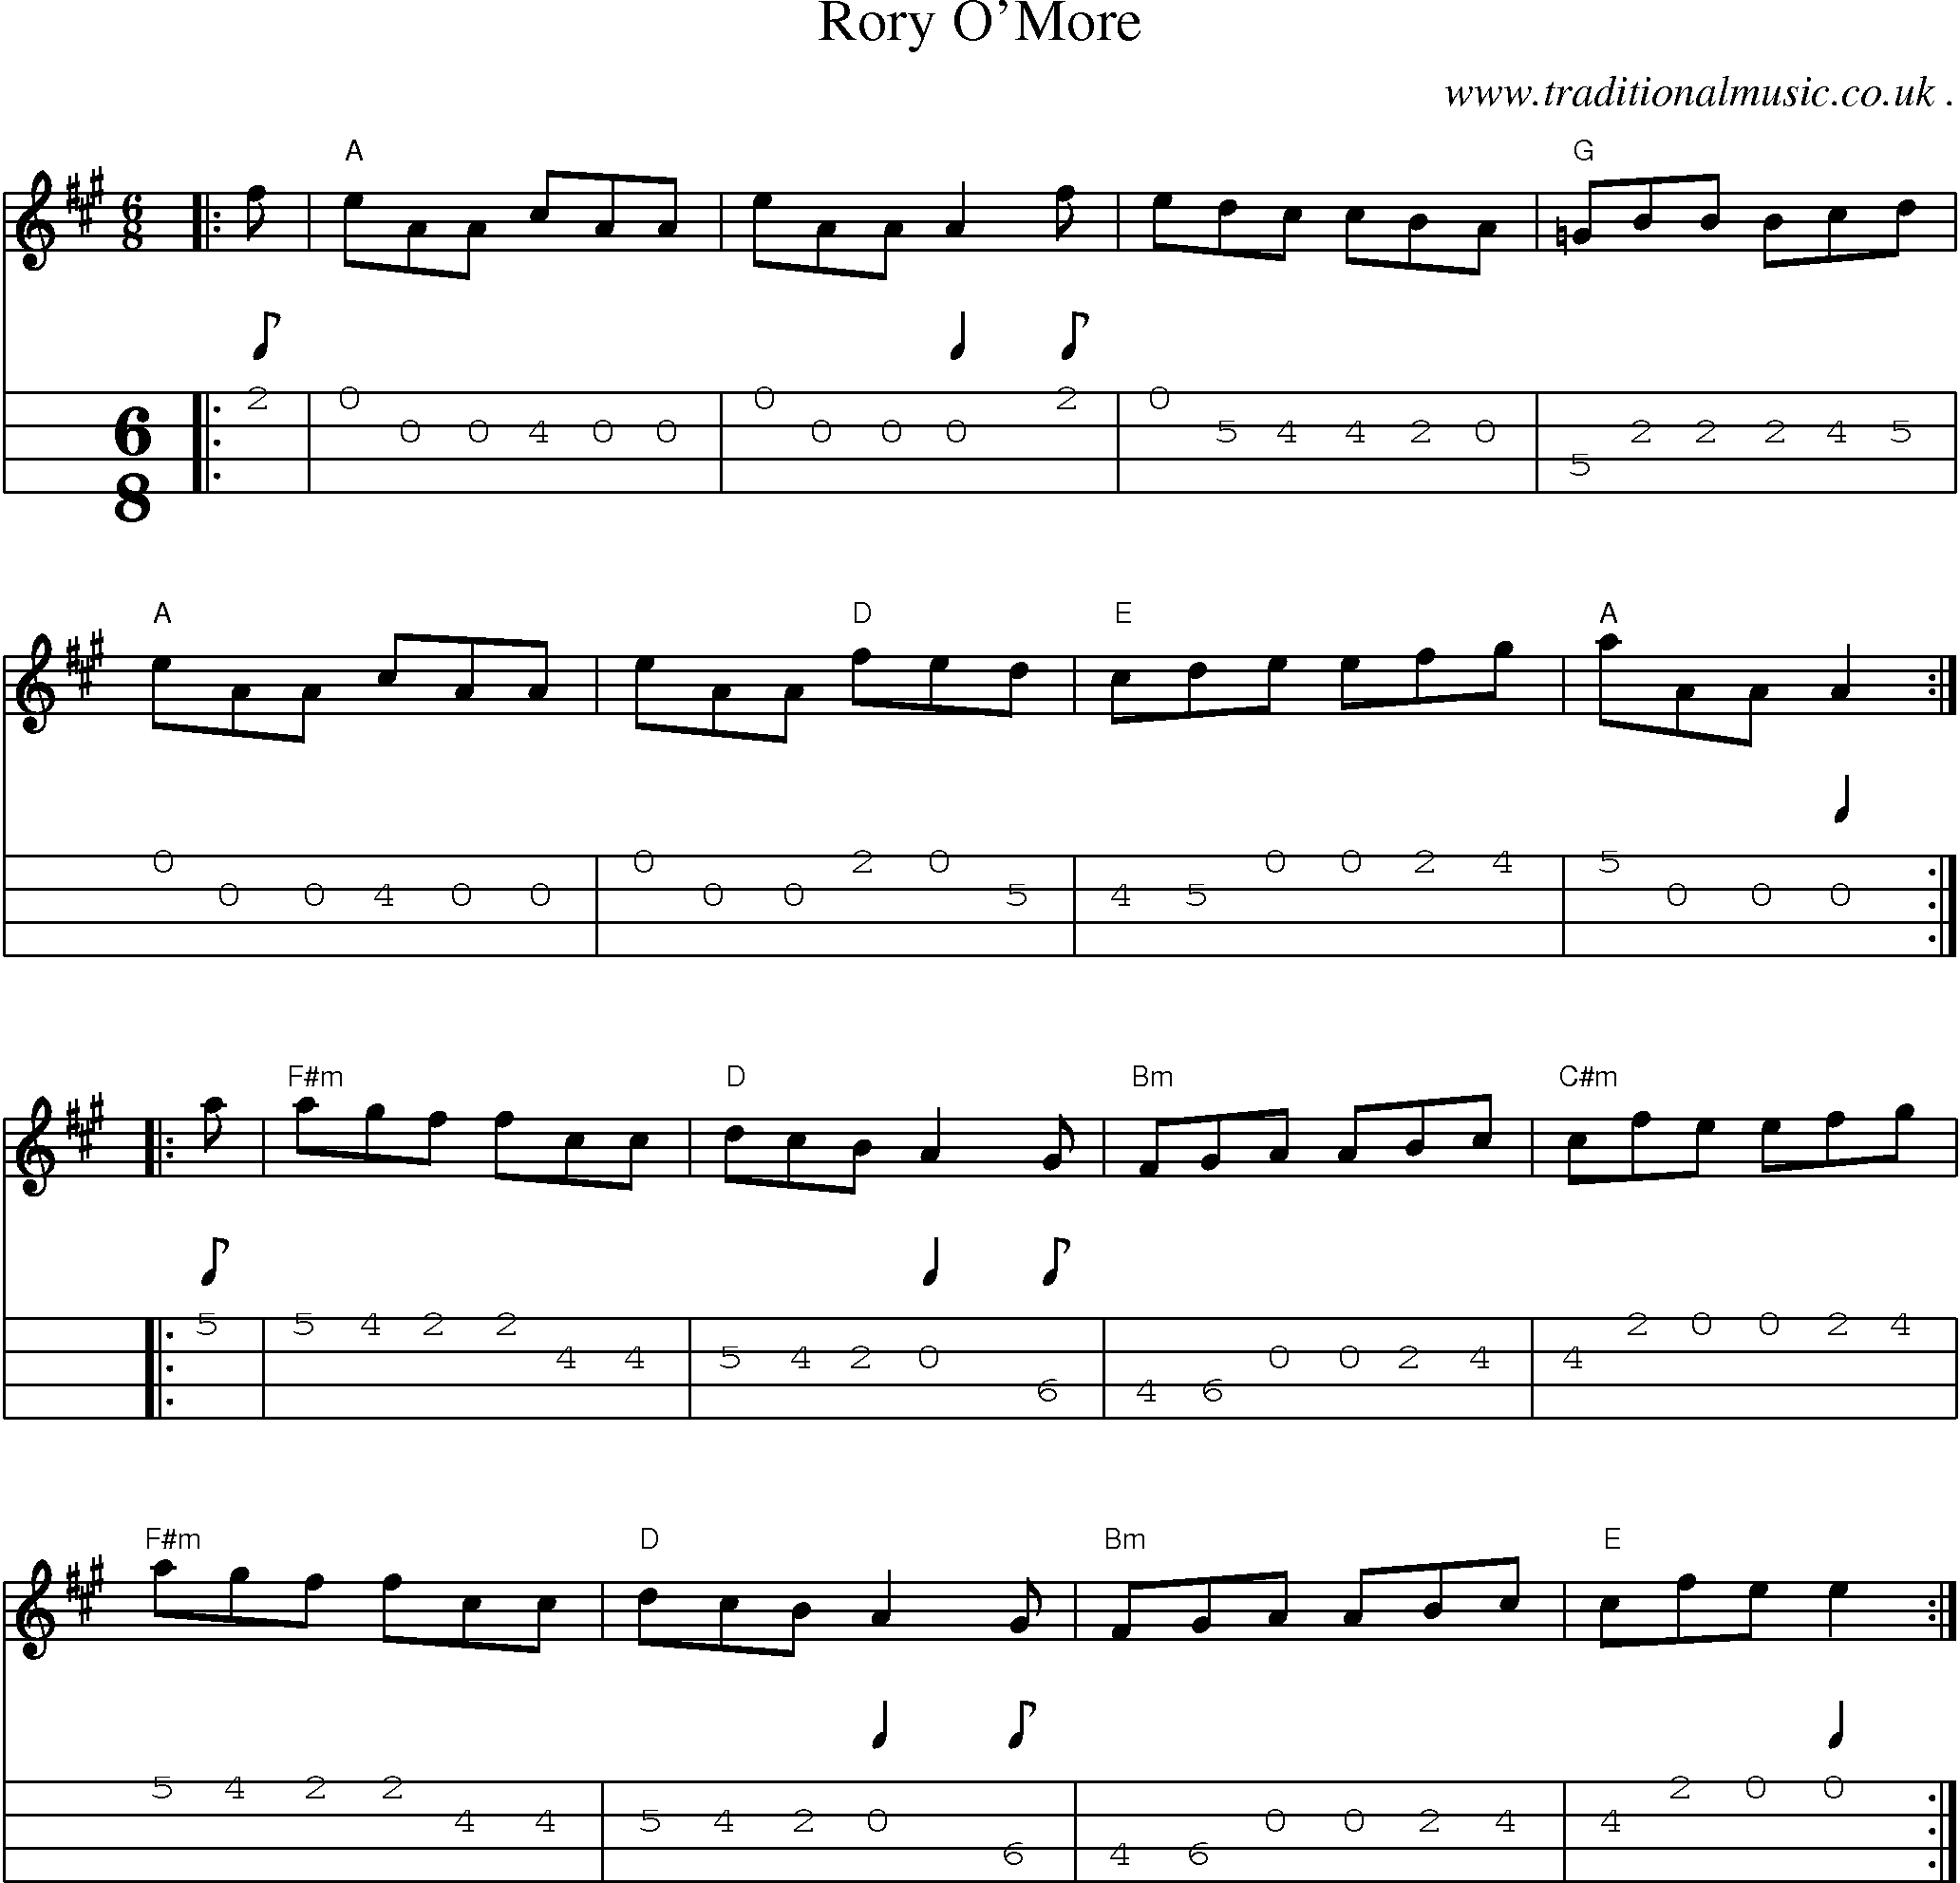 Music Score and Guitar Tabs for Rory Omore